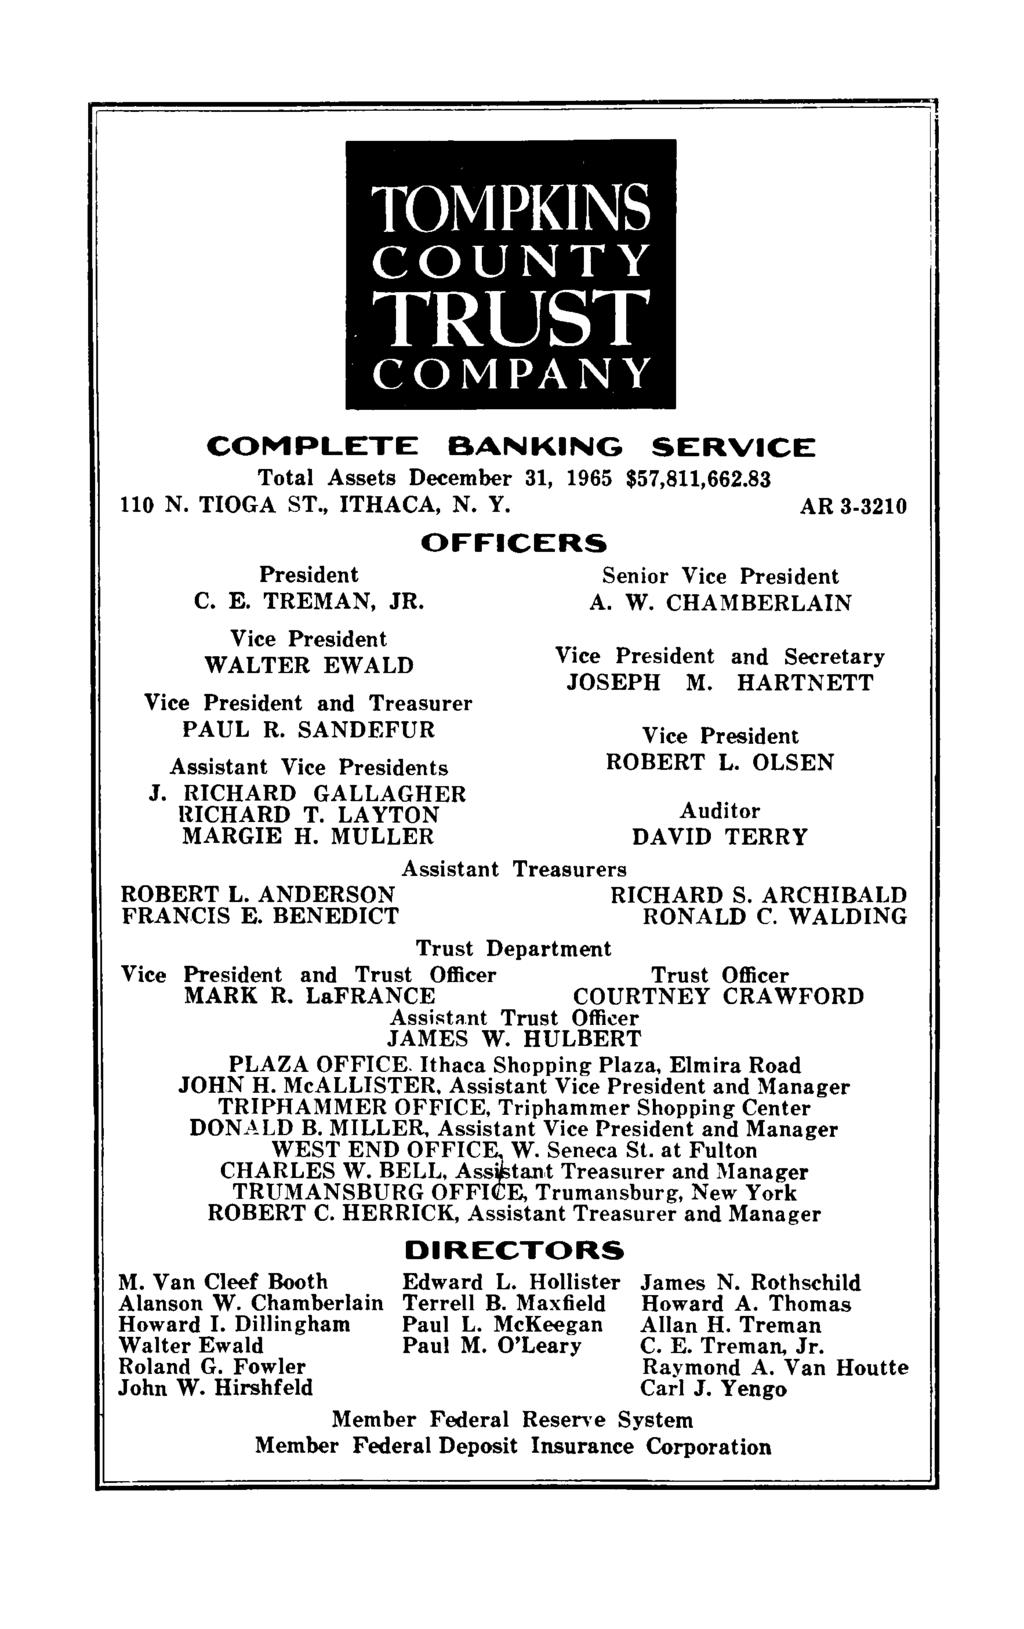 TOMPKINS COUNTY.TRUST COMPANY COMPLETE BANKING SERVICE Total Assets December 31, 1965 $57,811,662.83 110 N. TIOGA ST., ITHACA, N. Y. AR 3-3210 President C. E. TREMAN, JR.